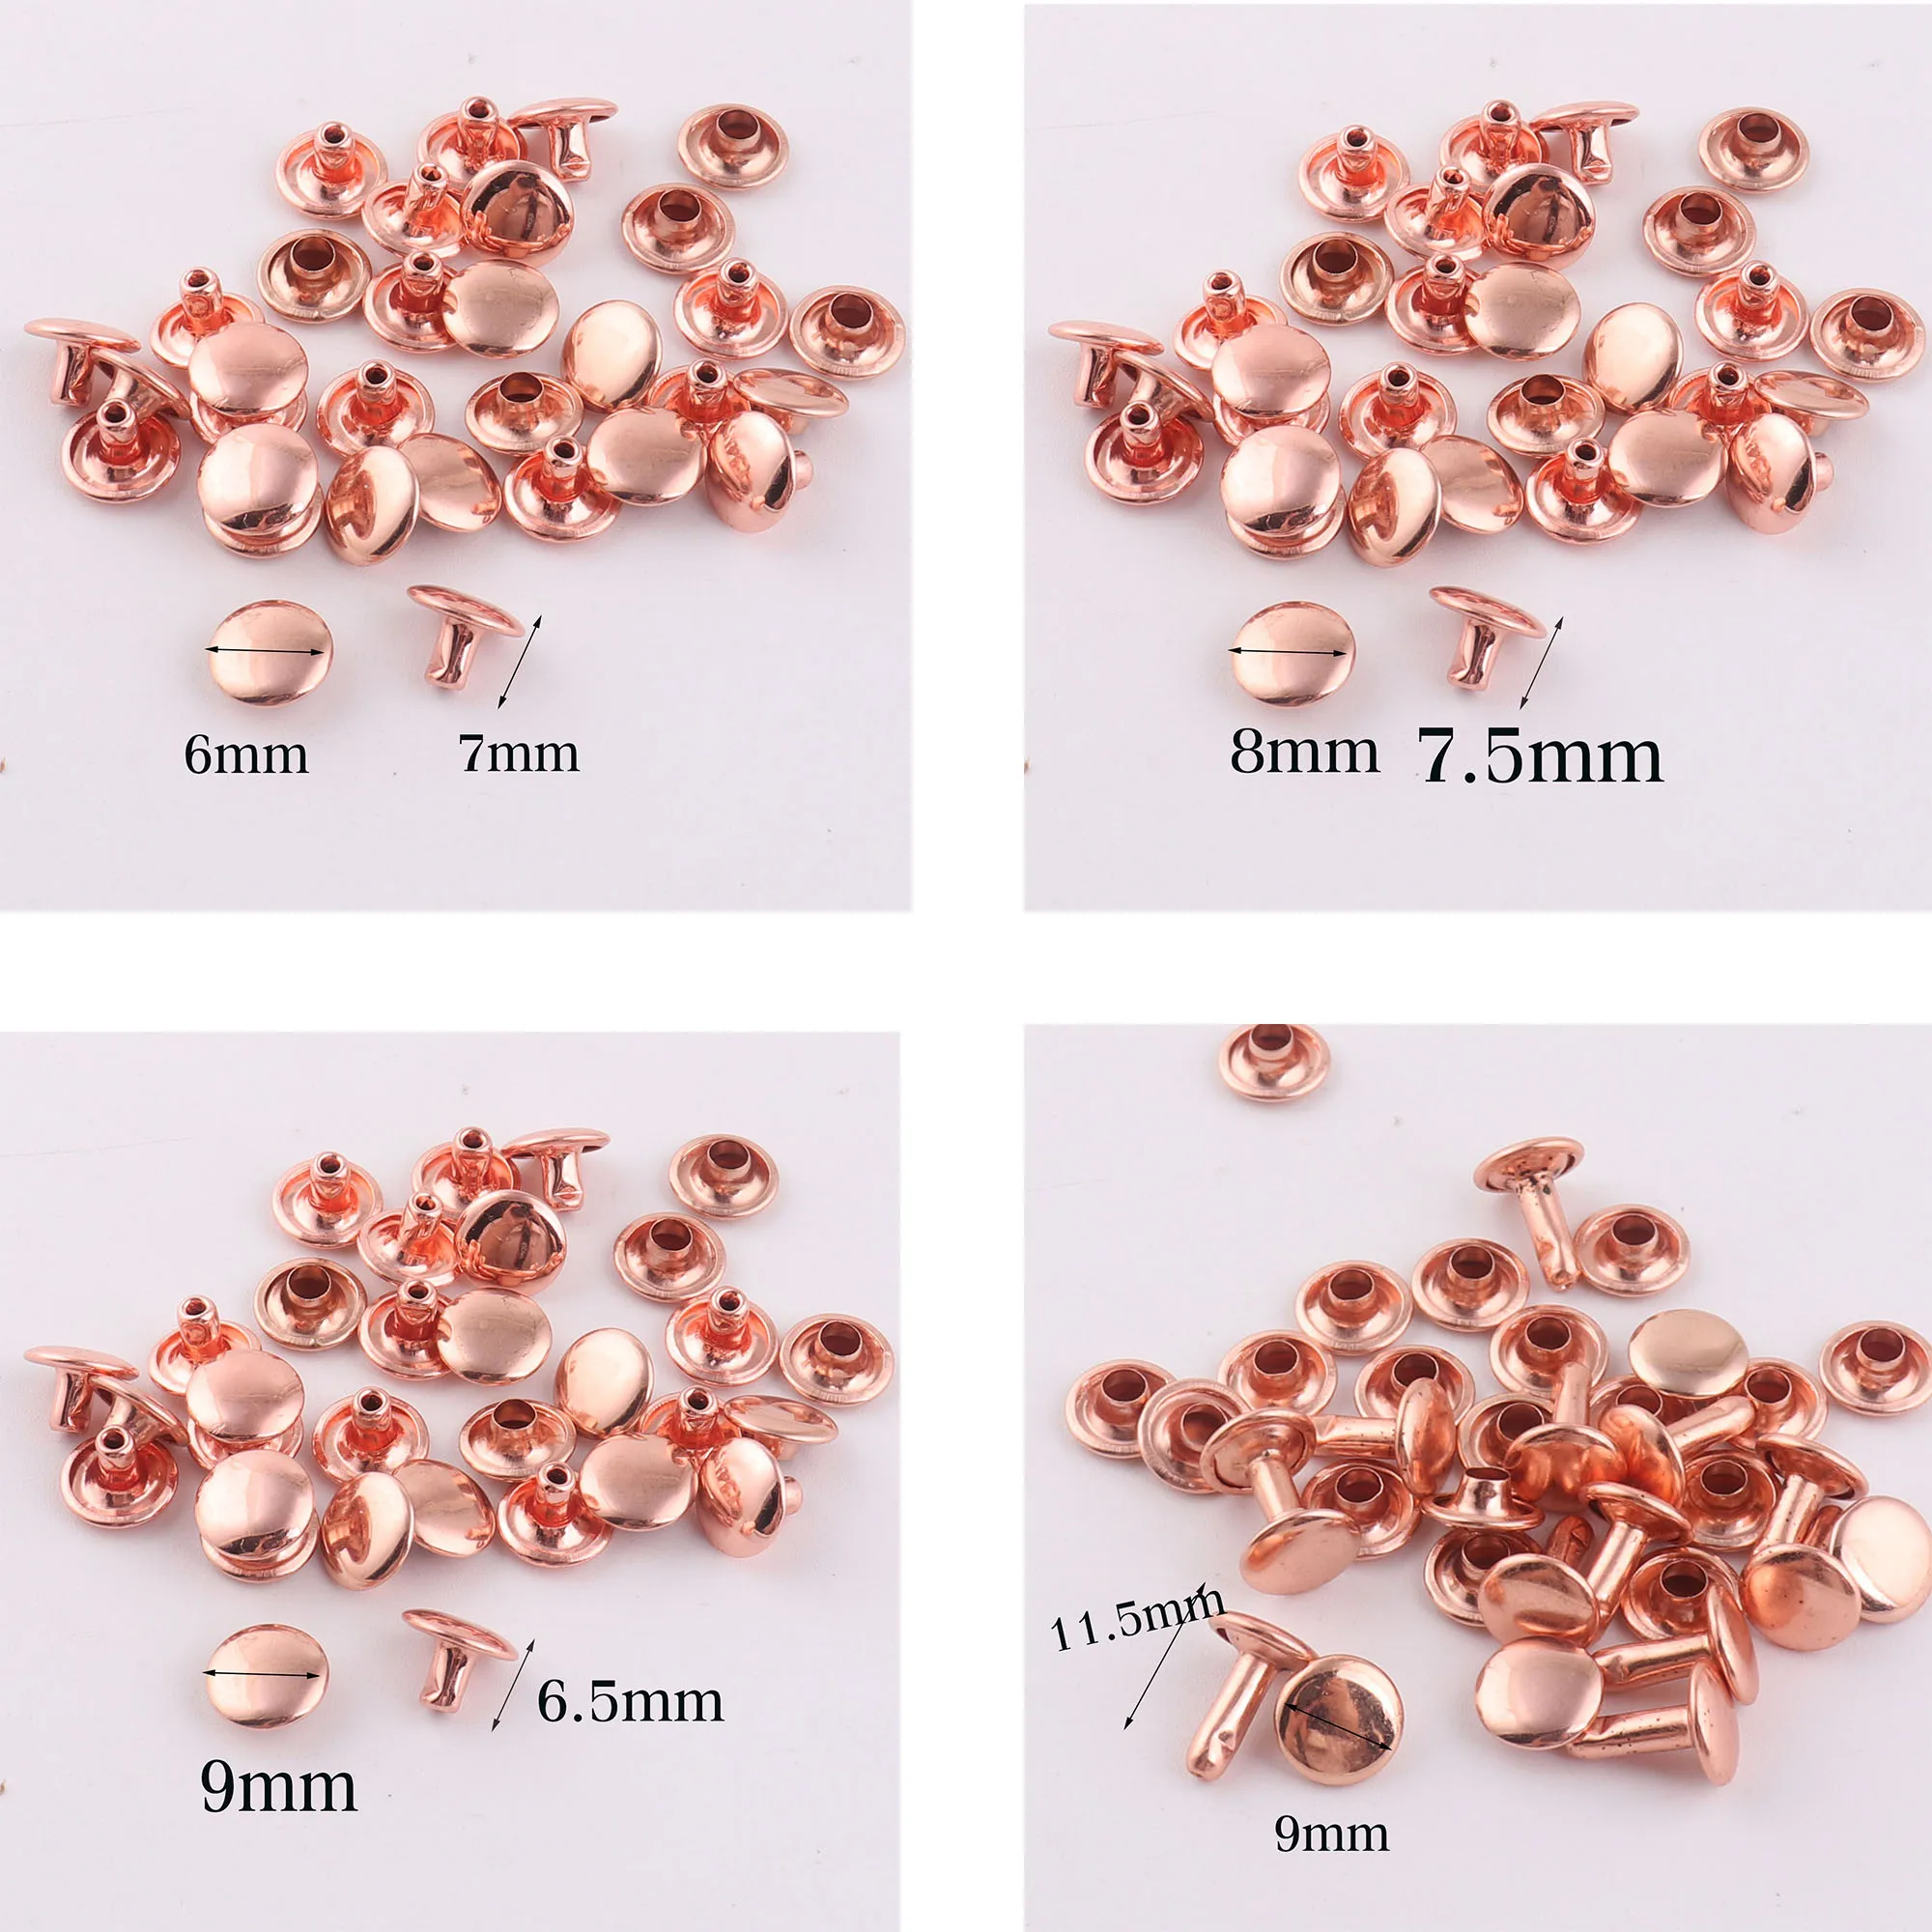 Rainbow 9mm Double Cap Rivets for Leather Crafting Copper Tubular Fasteners  Round Rapid Rivet for Fabric Purse Shoes Belts - AliExpress